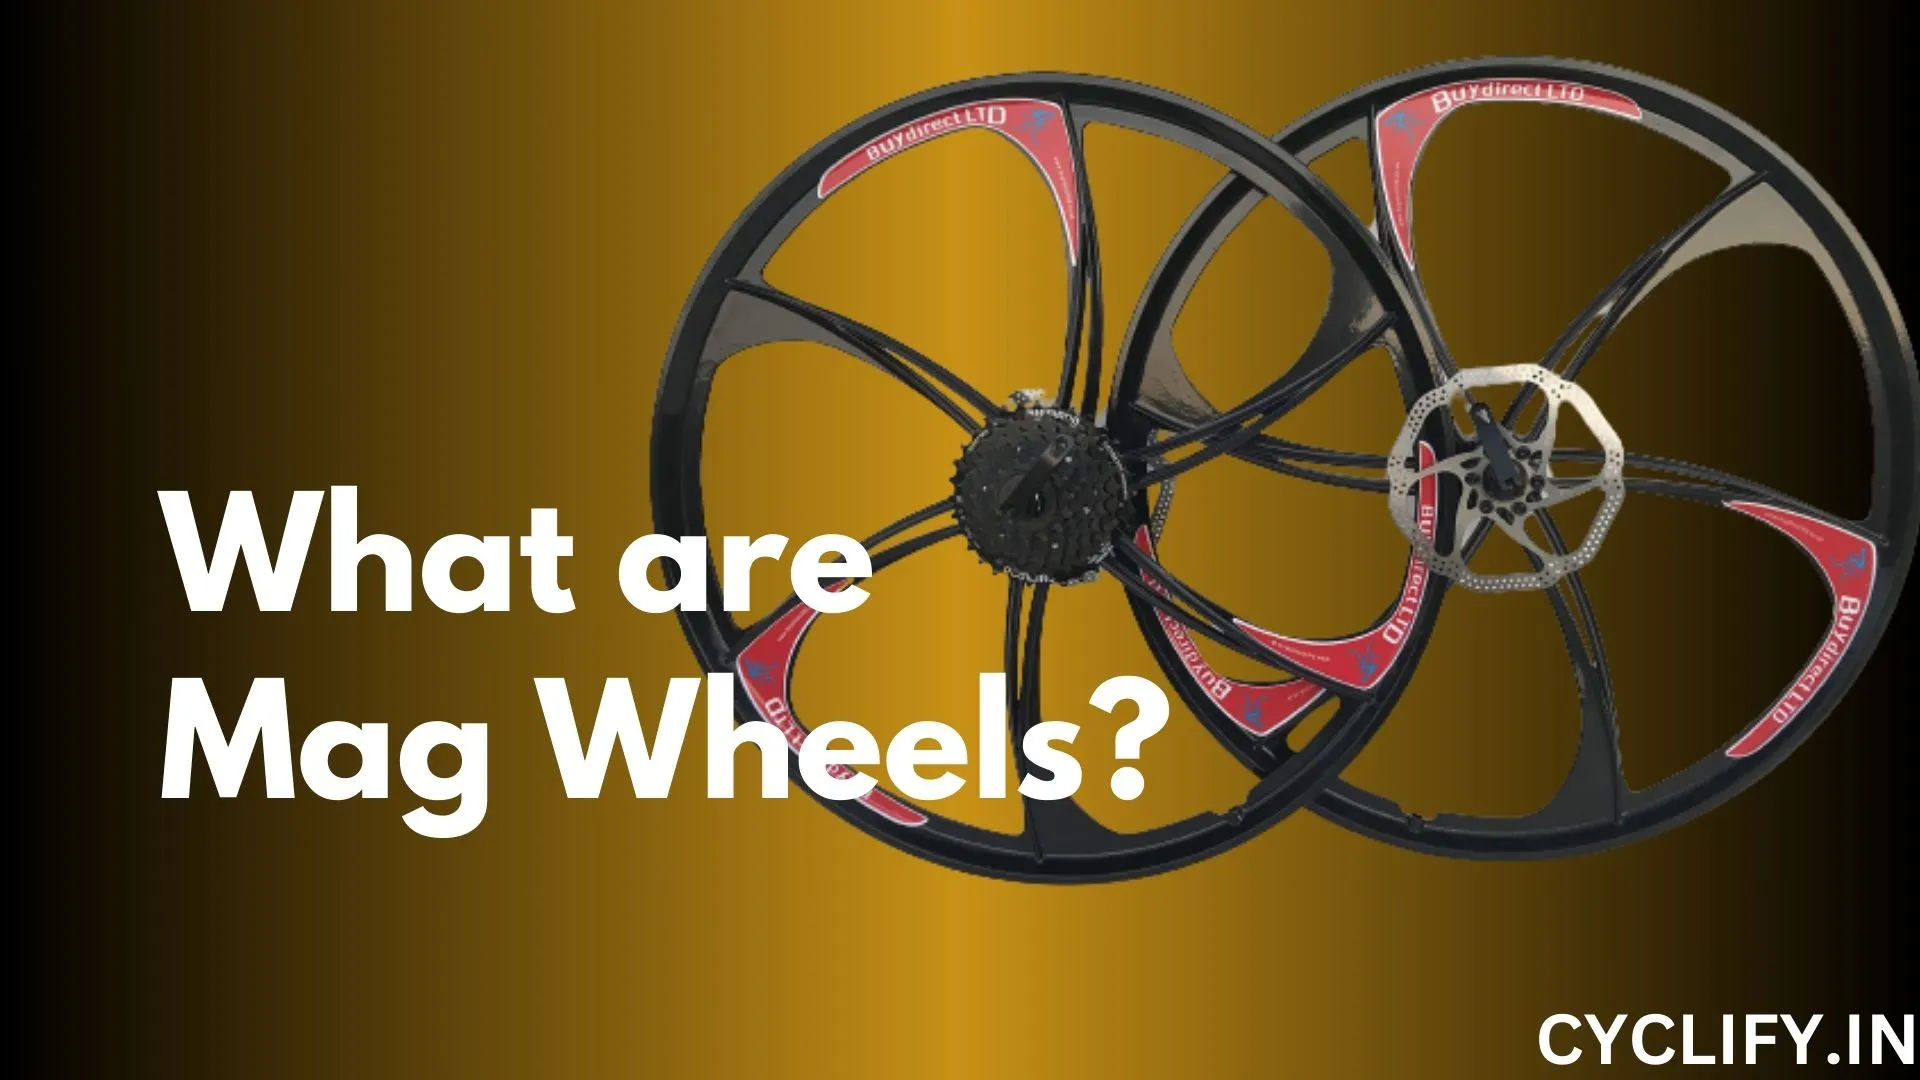 What are Mag wheels on a Bike